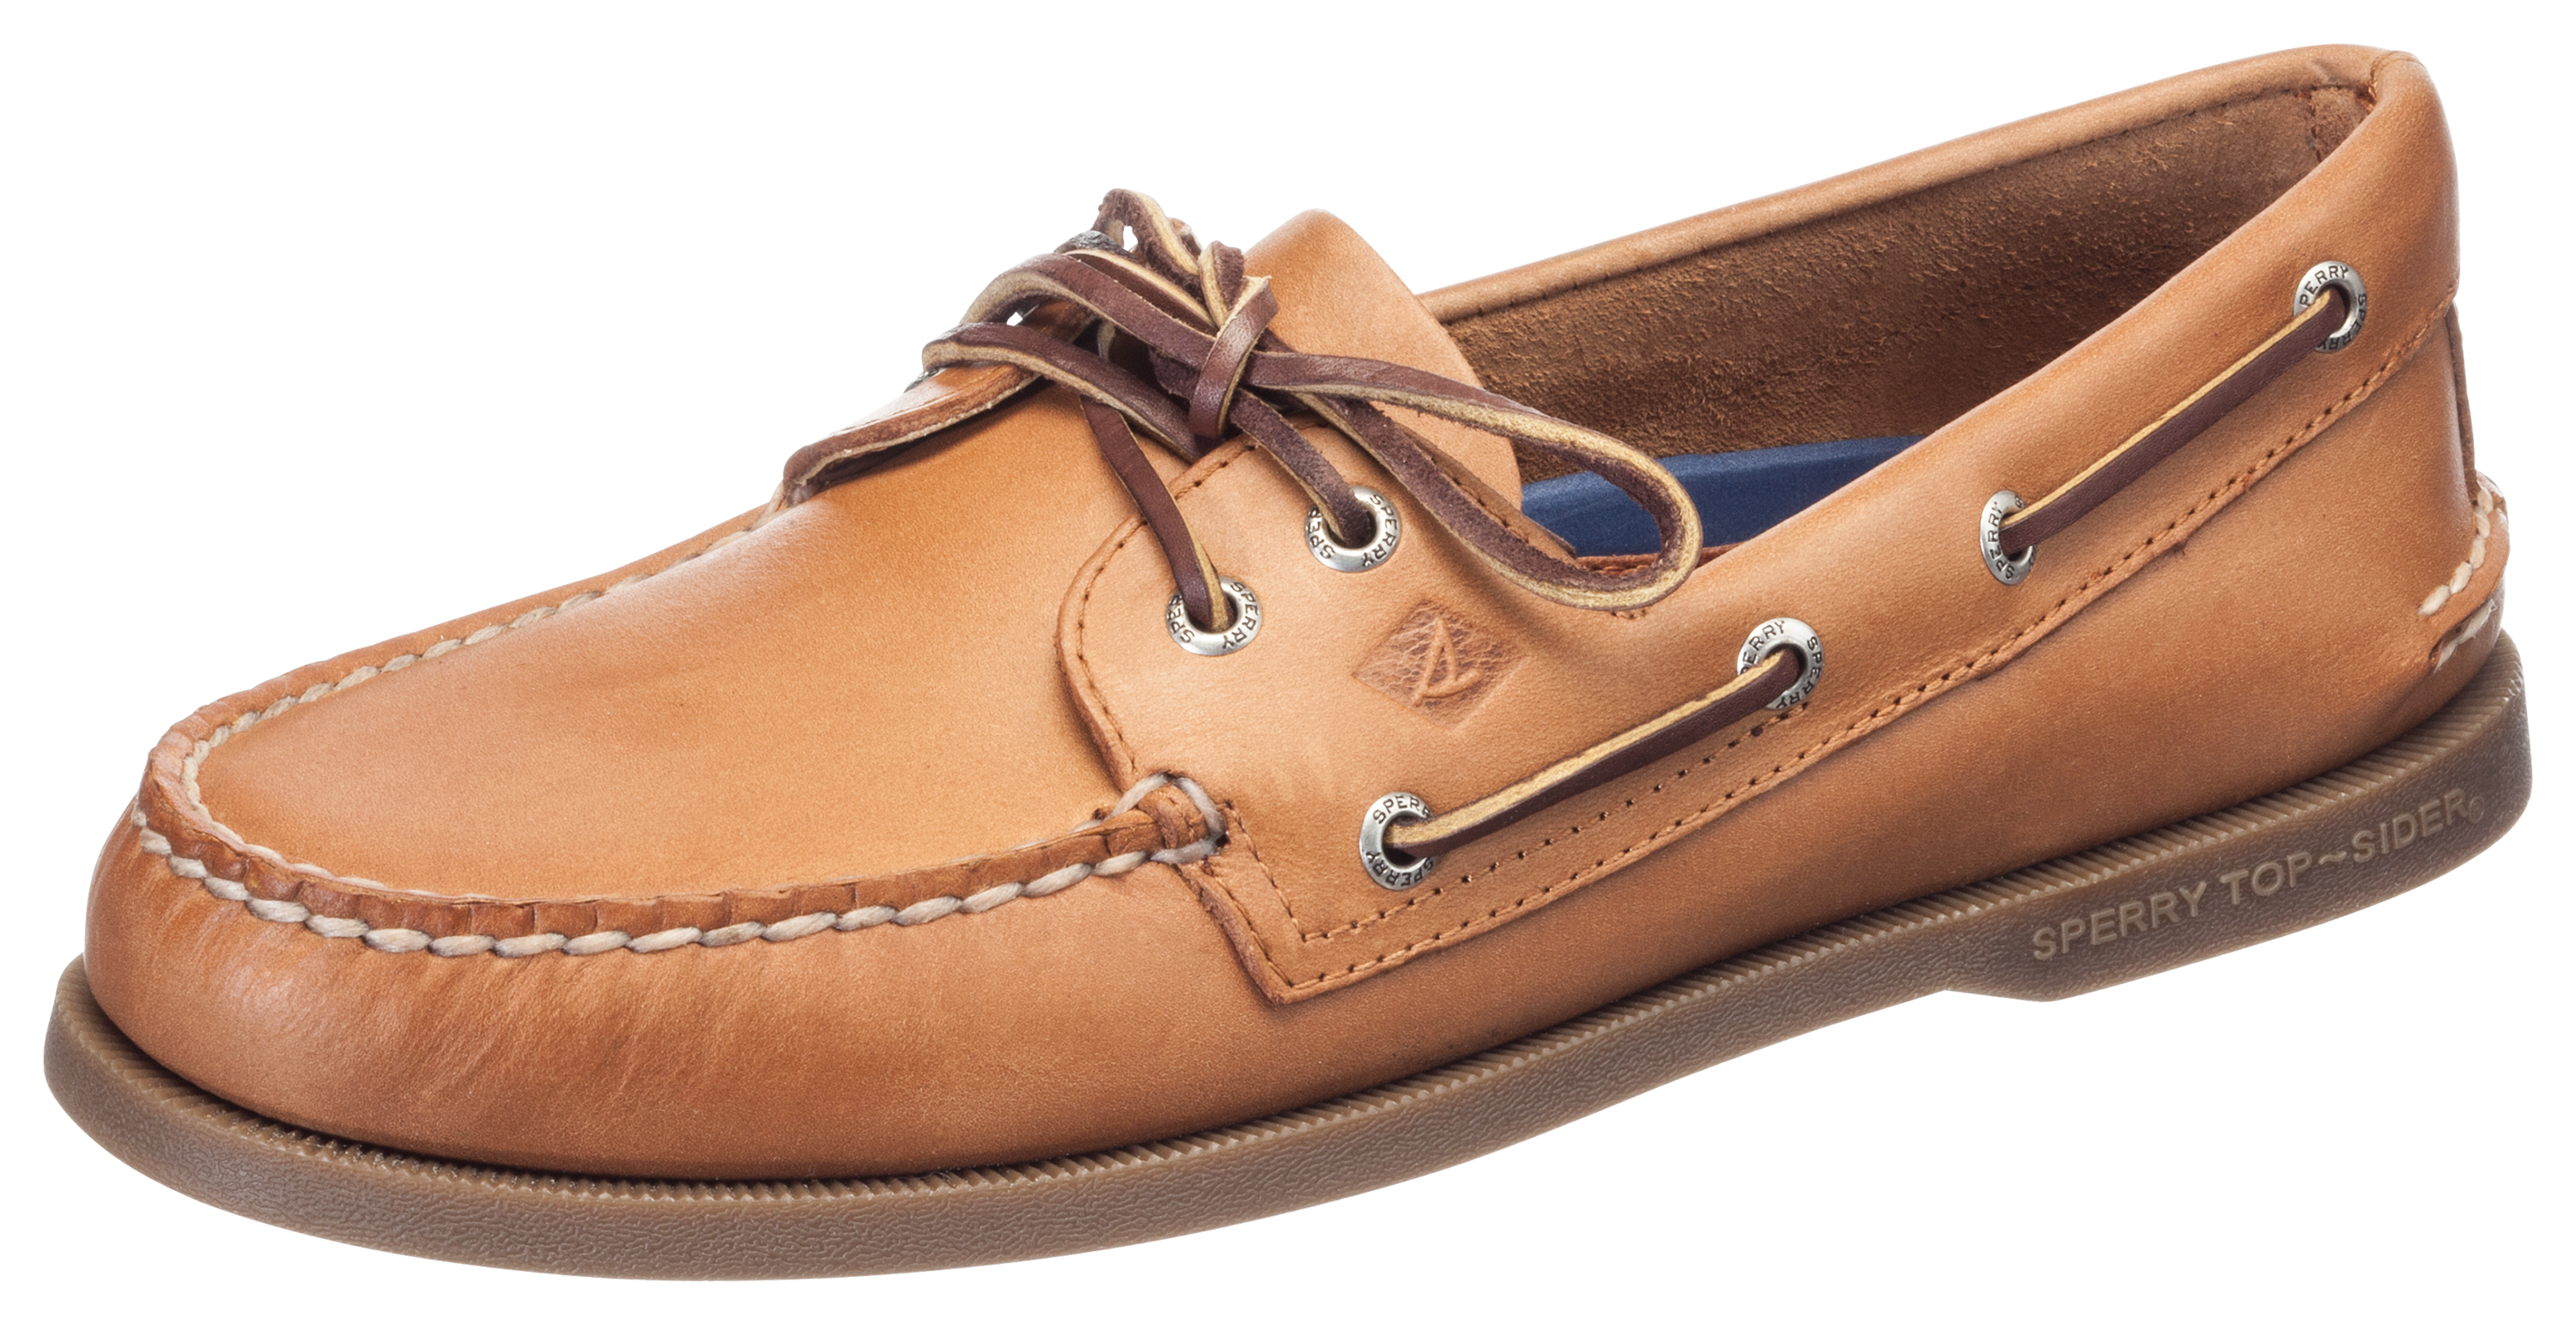 Intuïtie Periodiek Hedendaags Sperry Authentic Original A/O 2-Eye Boat Shoes for Men | Bass Pro Shops